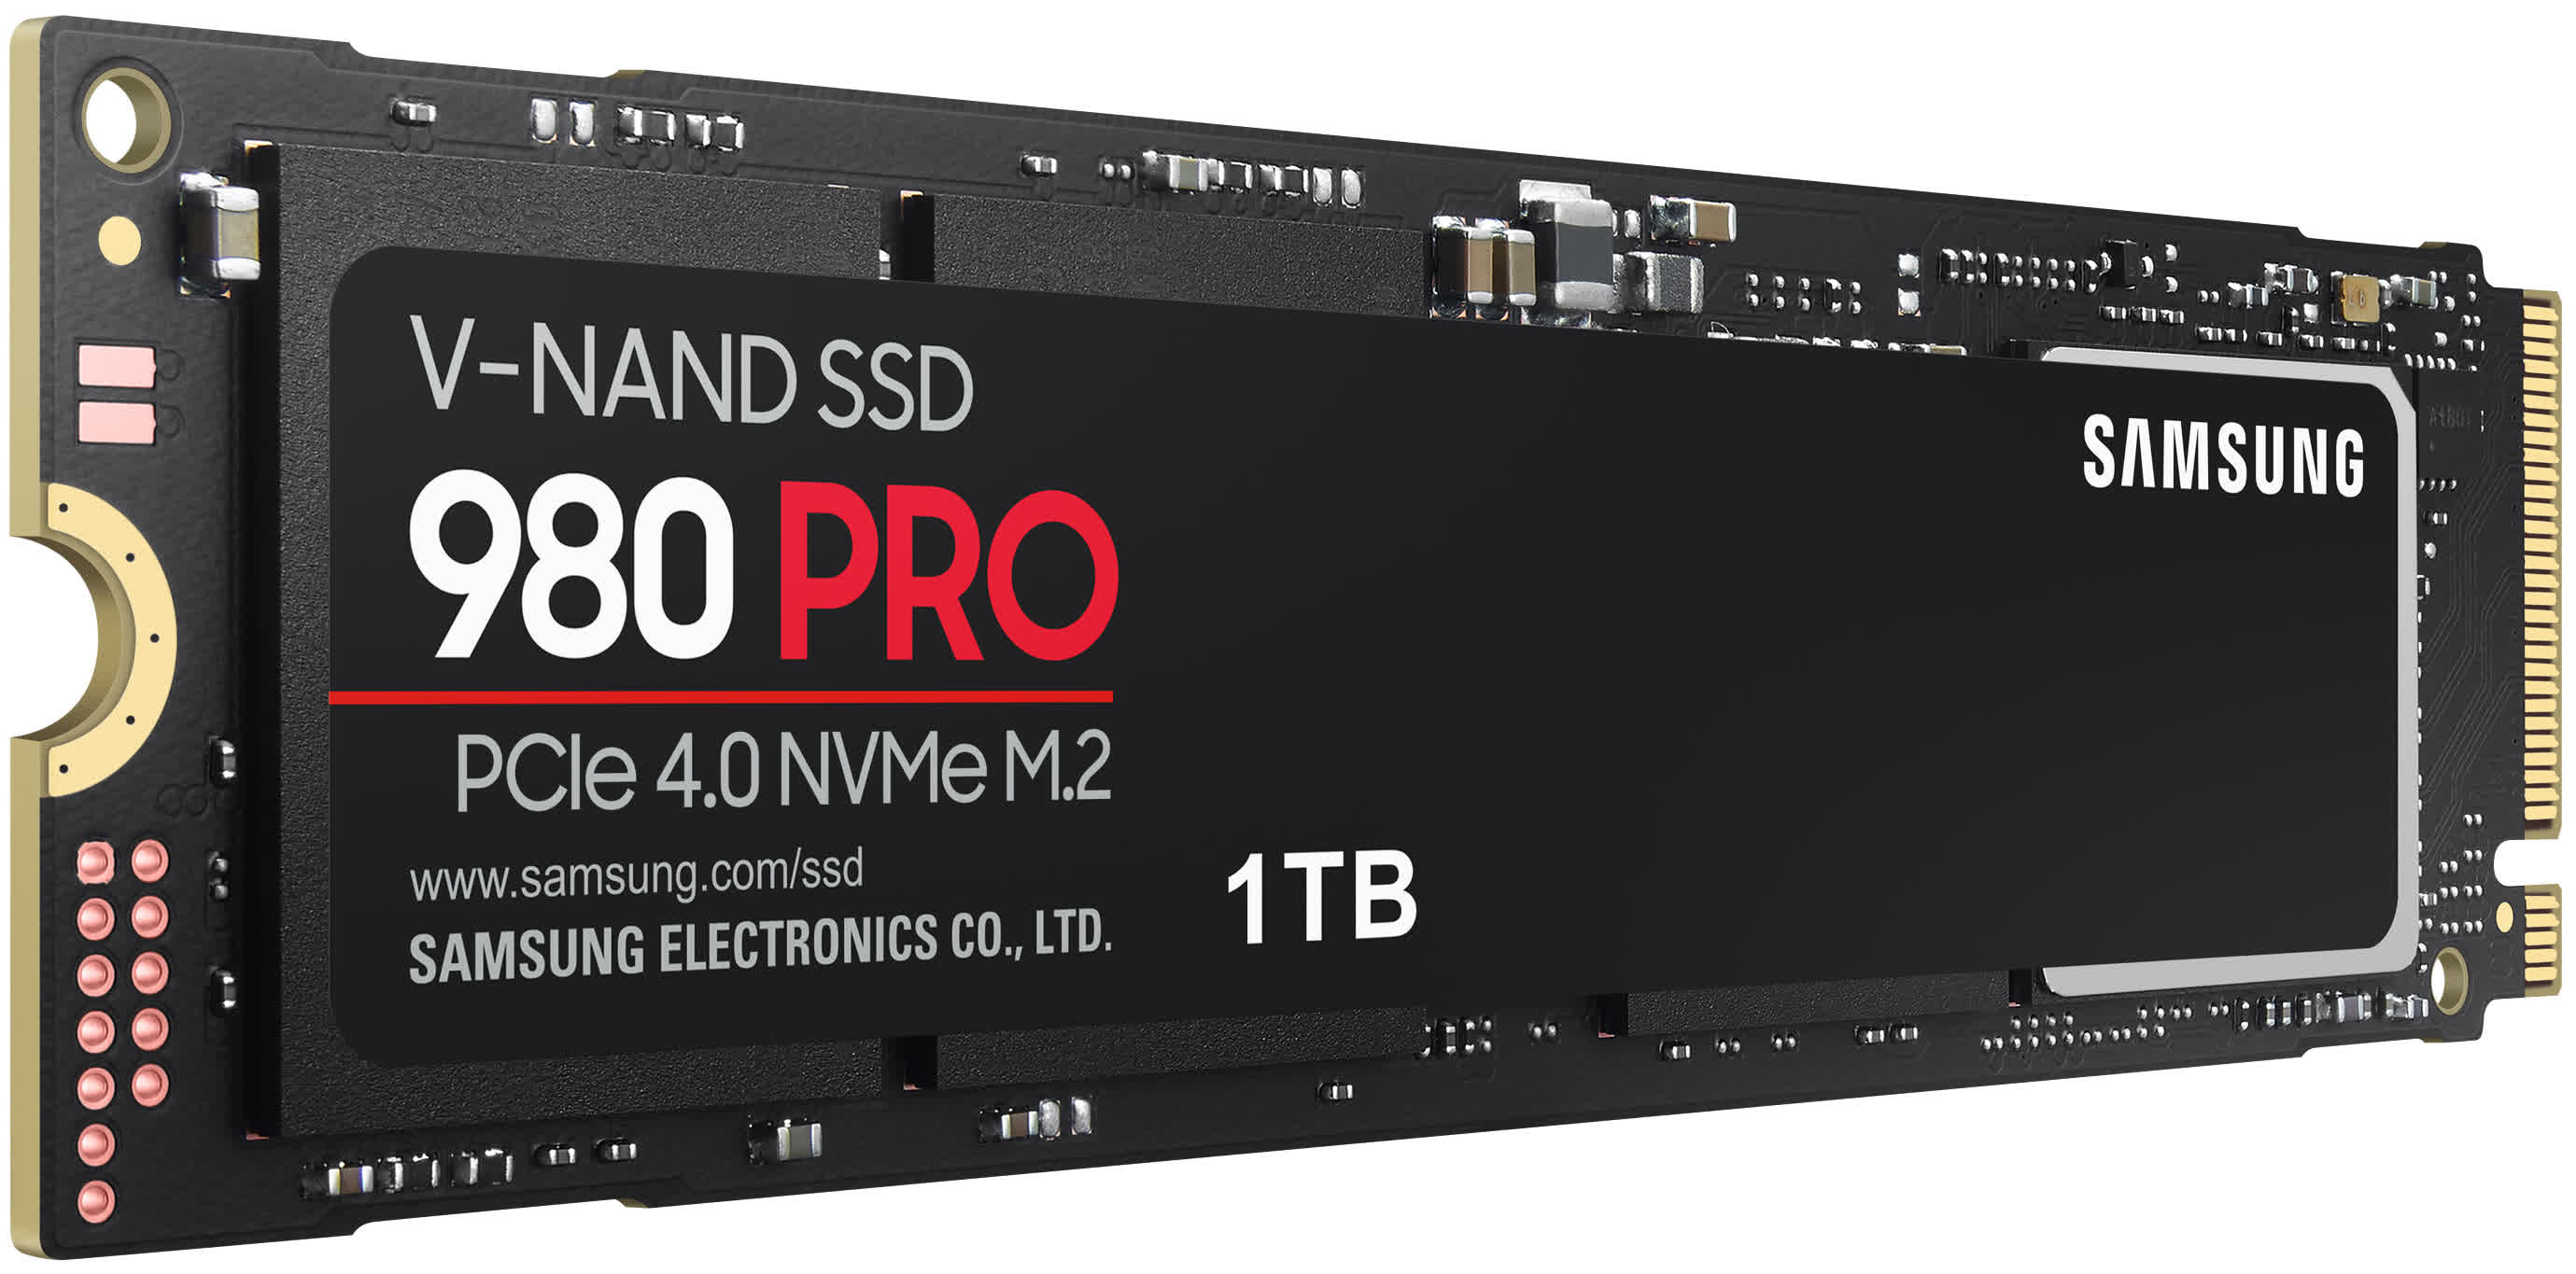 Save up to 33 percent on Samsung's excellent 980 Pro SSD during Prime Day